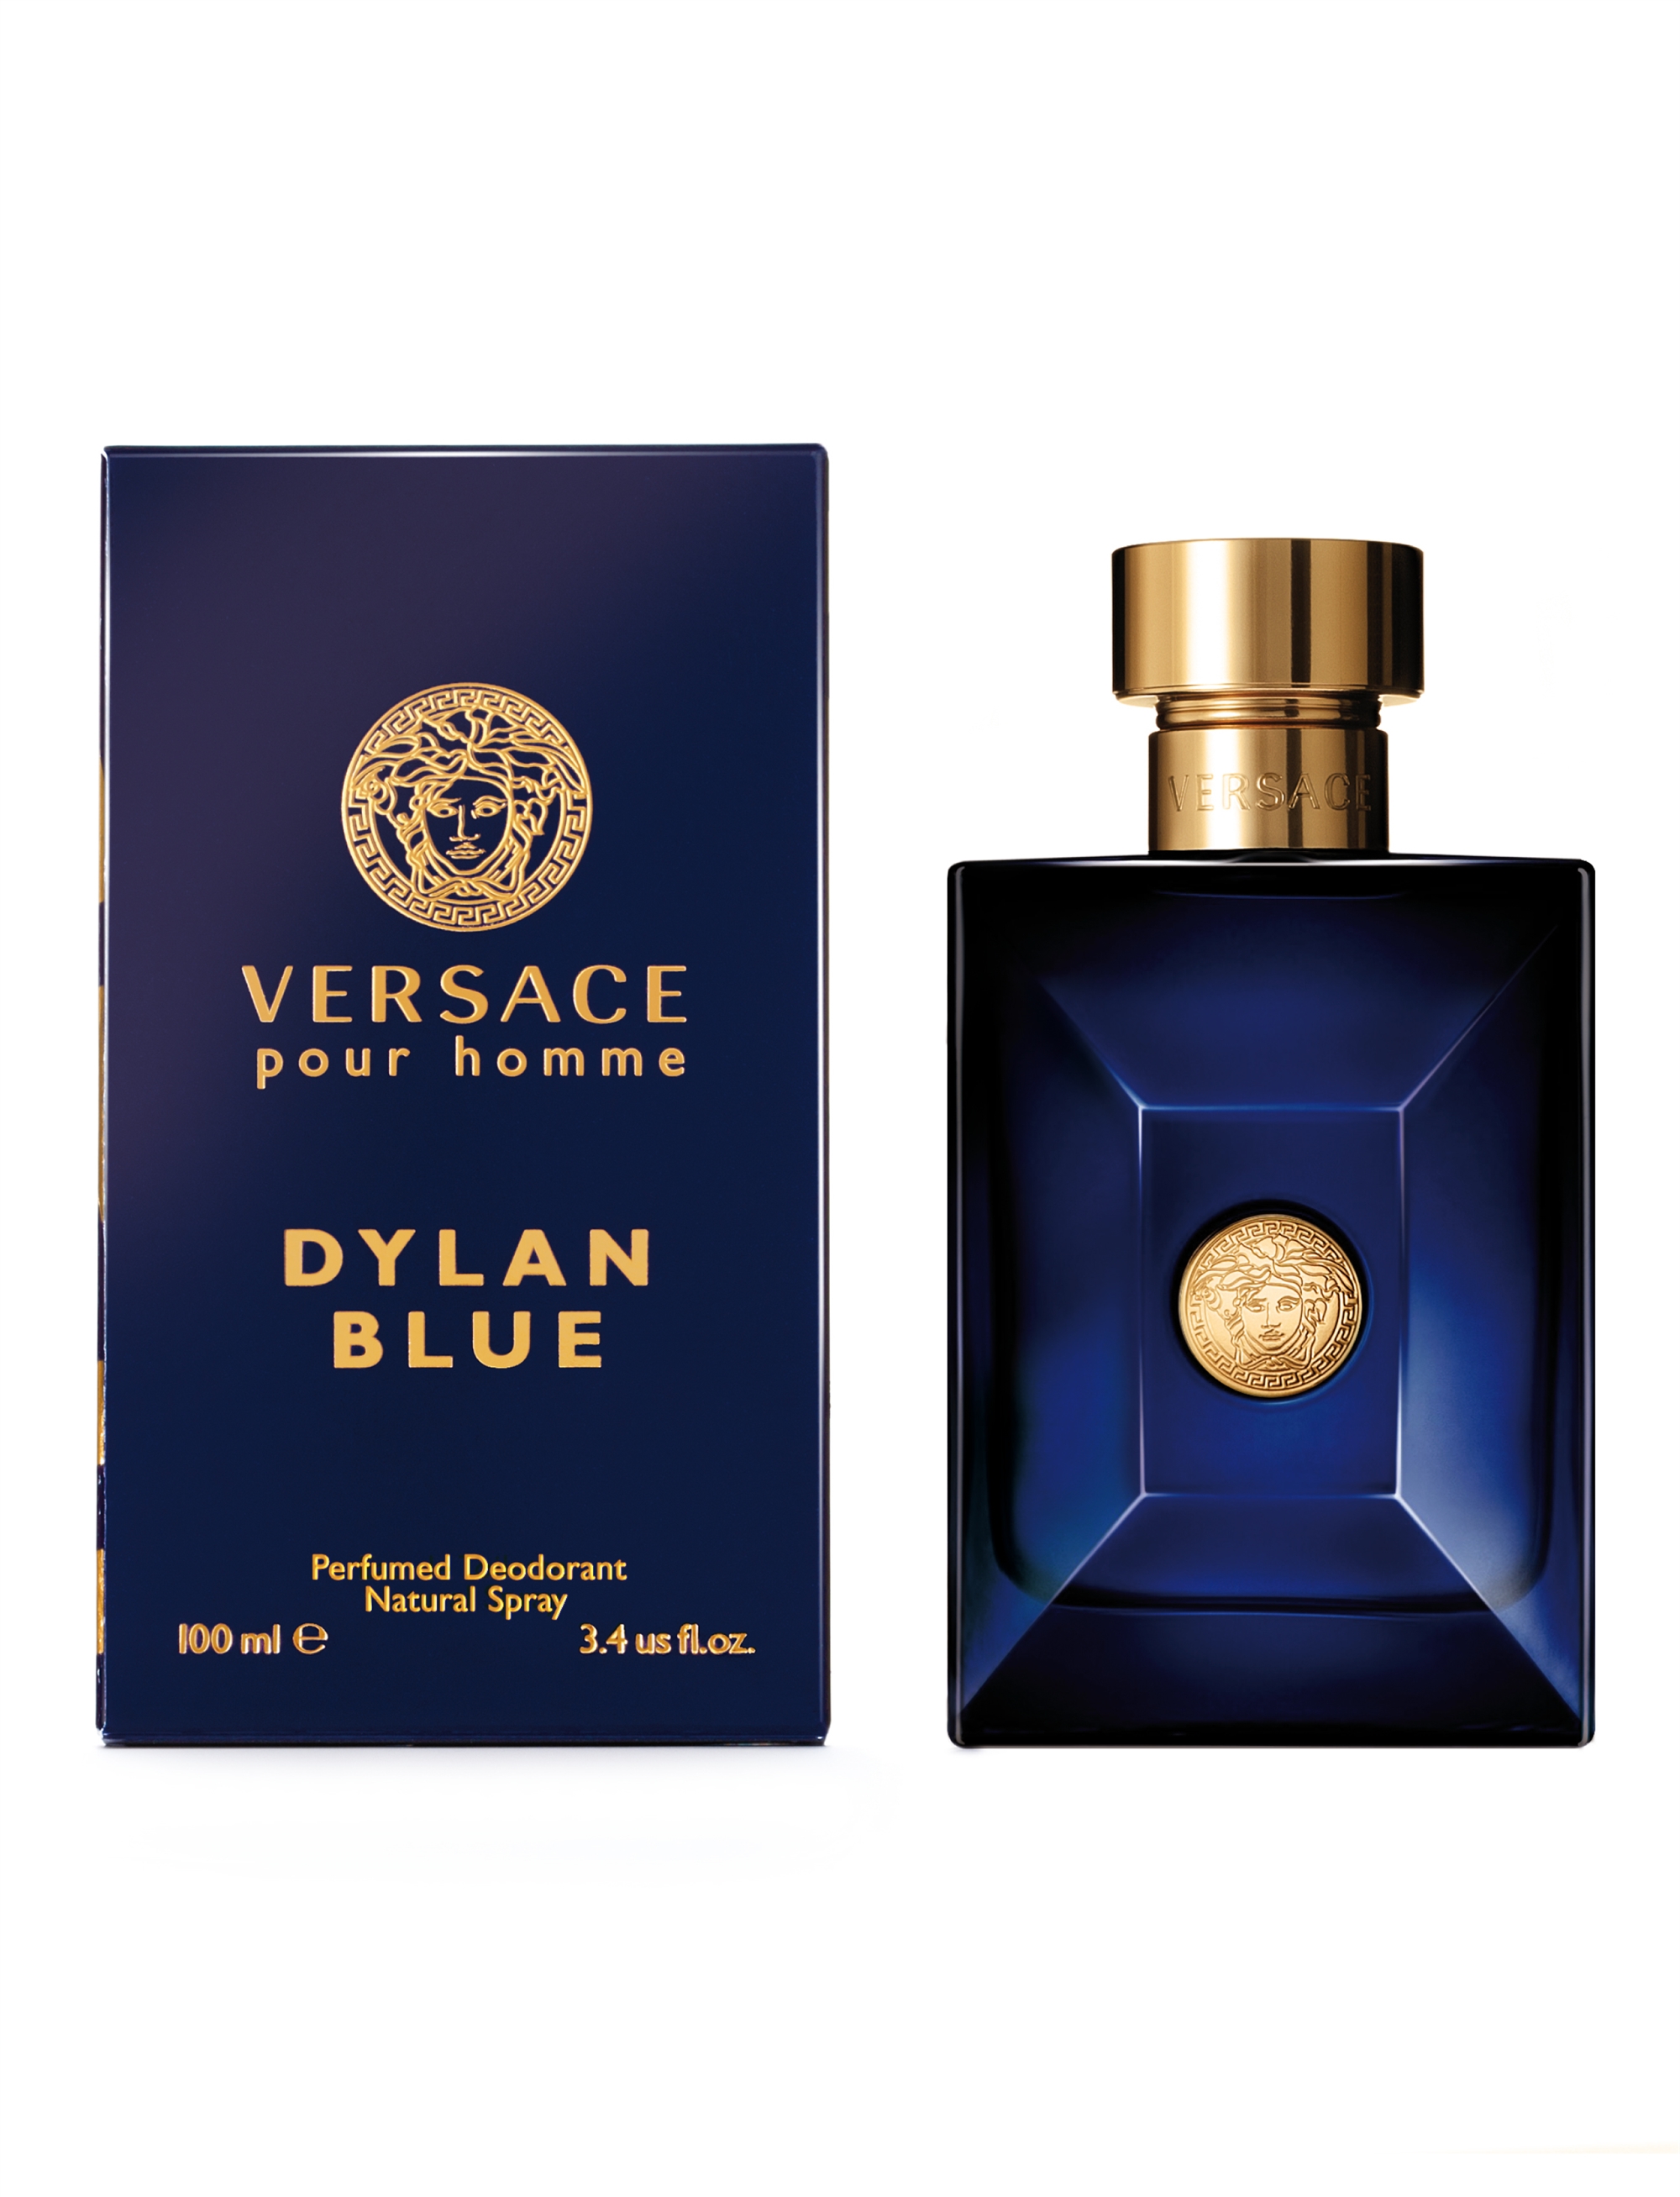 Versace Dylan Blue Pour Homme Deo Spray 100 ml